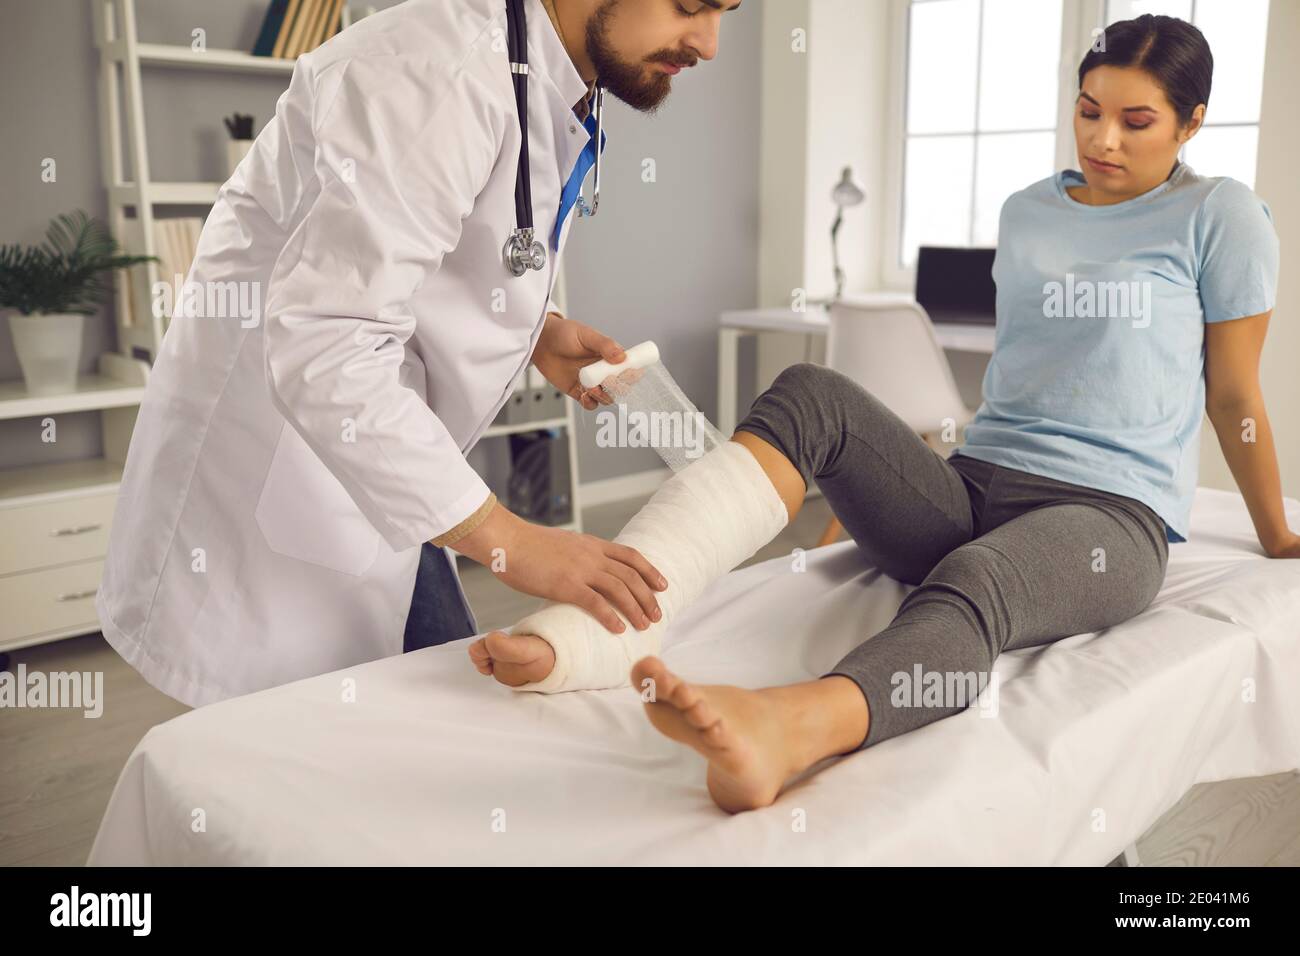 Doctor at the injury care center provides first aid to young woman with leg bone fracture Stock Photo